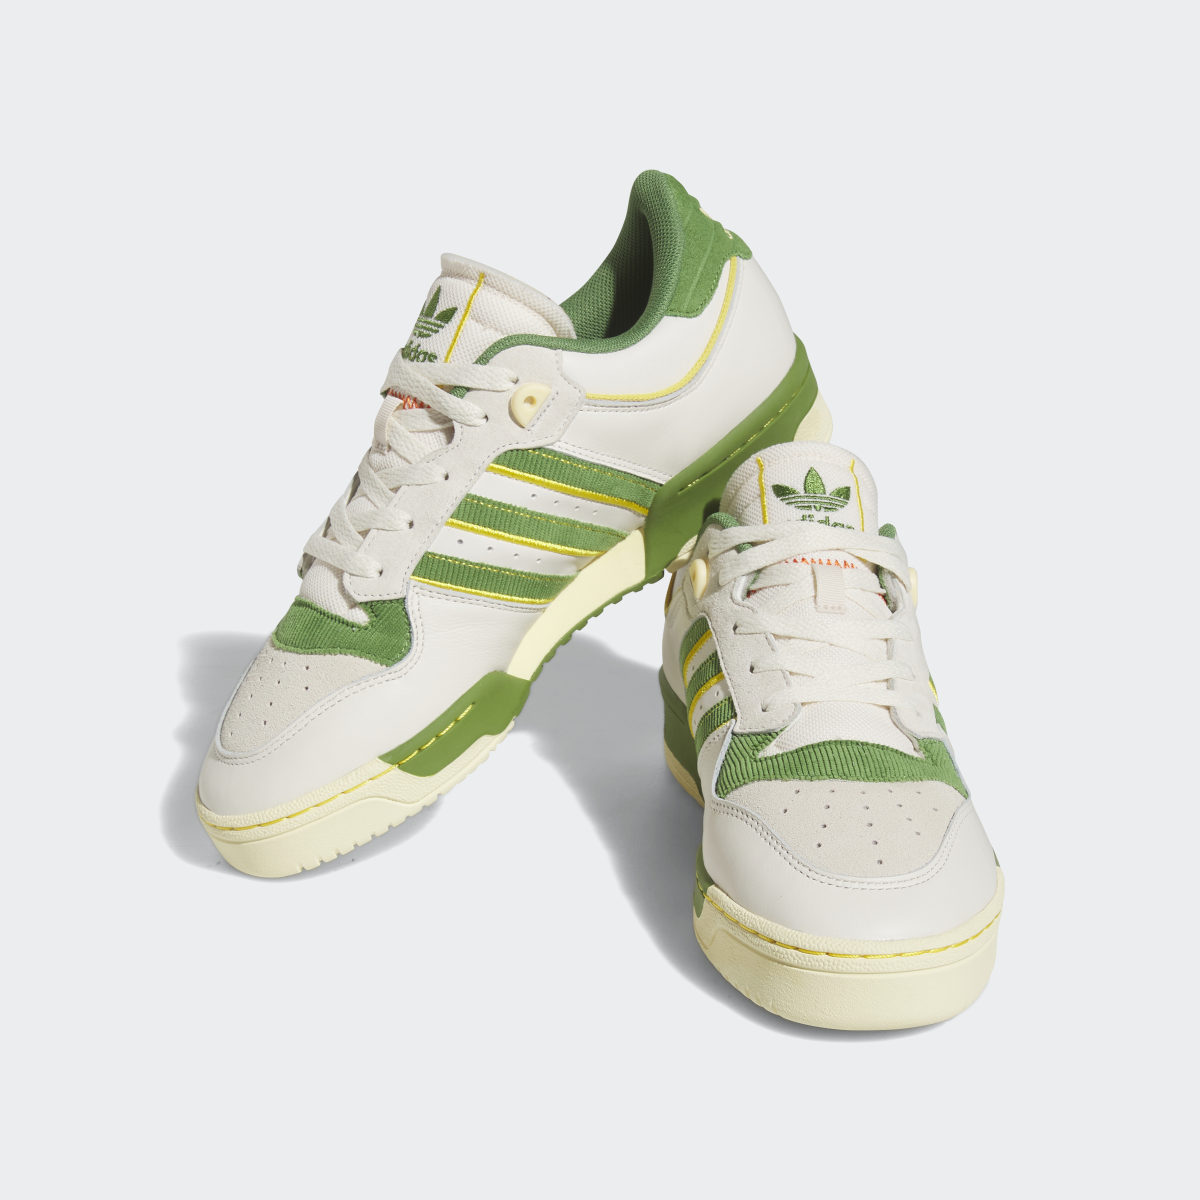 Adidas Rivalry Low 86 Shoes. 5